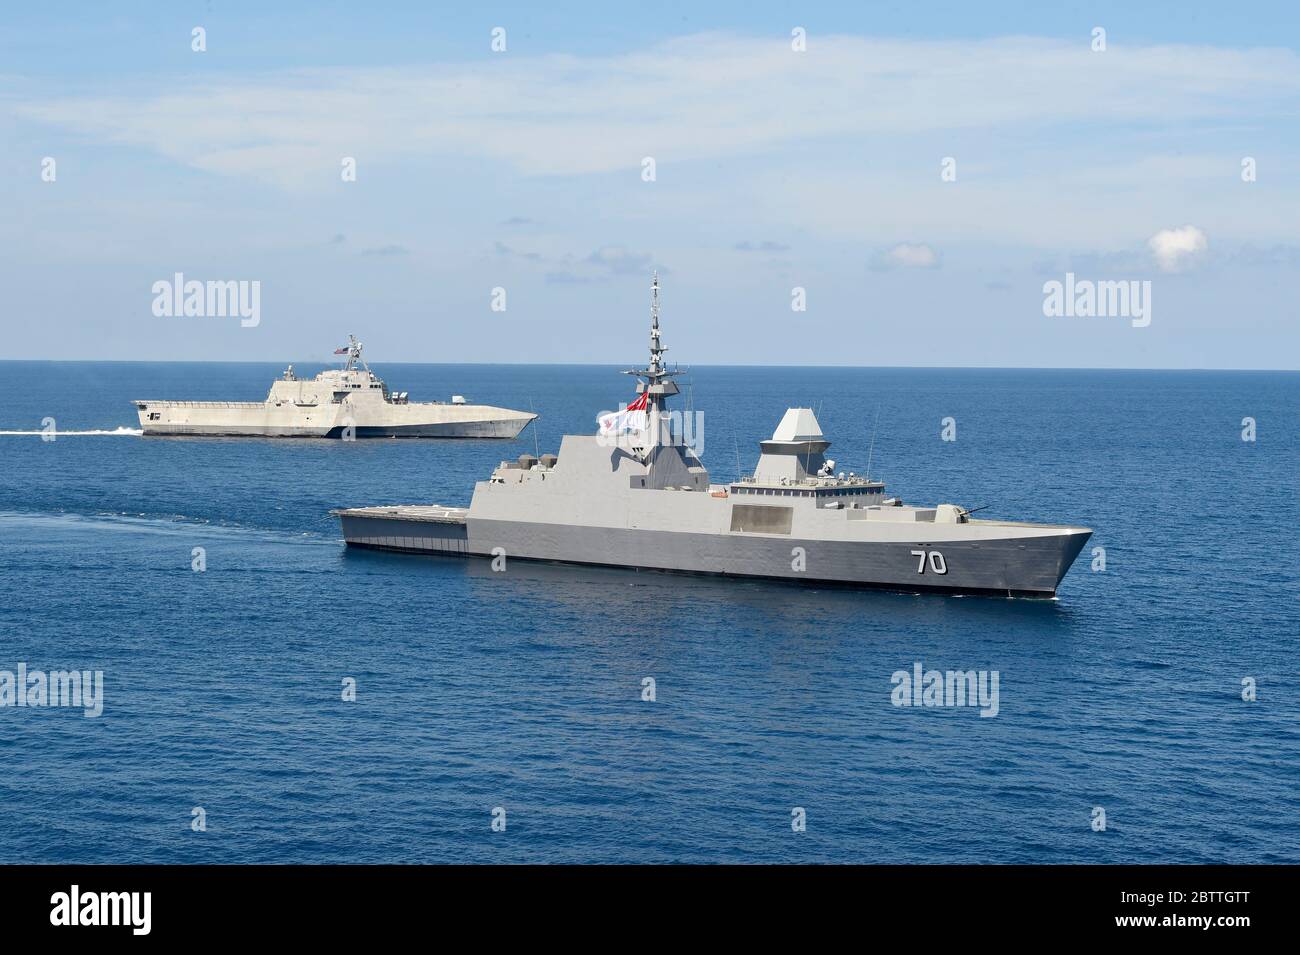 The U.S. Navy Independence-variant littoral combat ship USS Gabrielle Giffords patrols alongside the Republic of Singapore Navy Formidable-class multi-role stealth frigate RSS Steadfast, right, in international waters May 25, 2020 in the South China Sea. Stock Photo